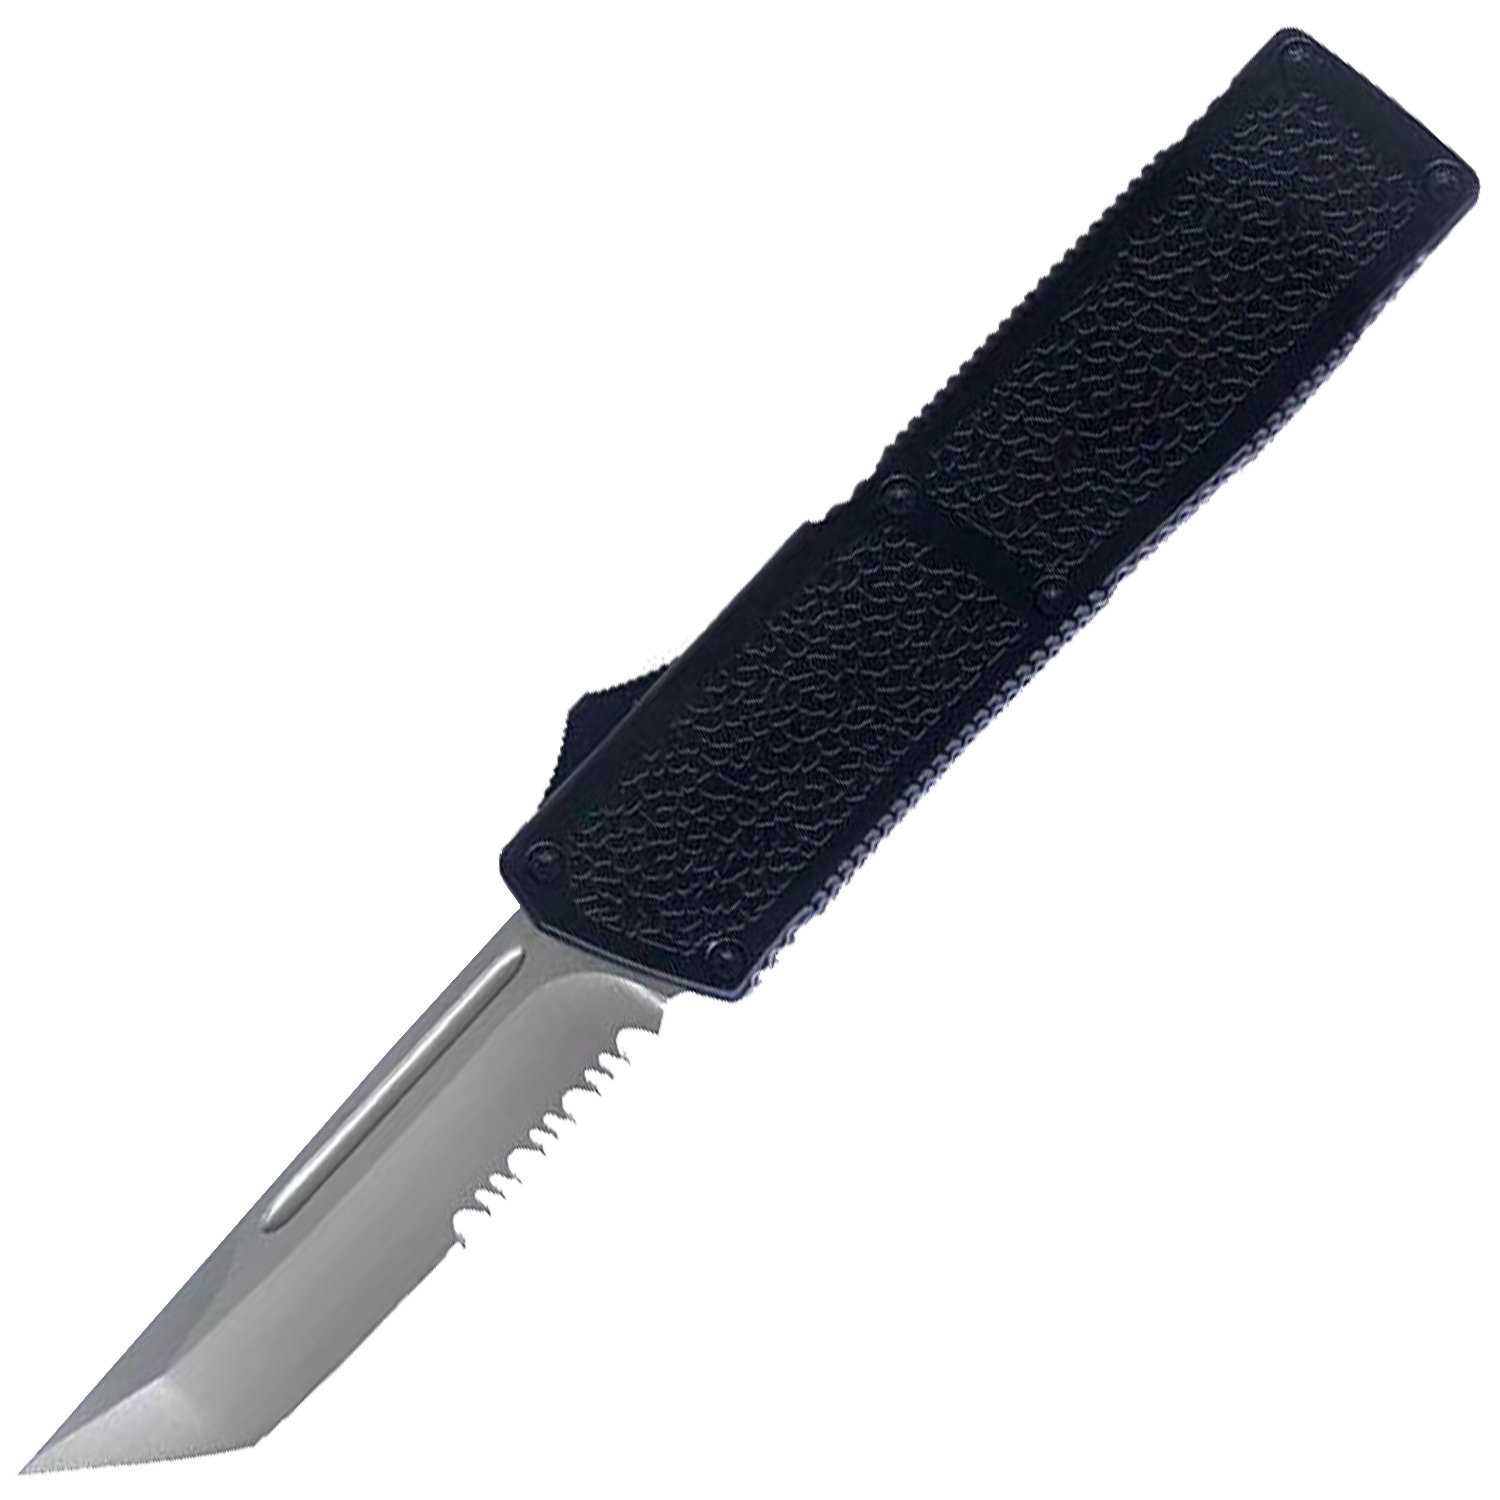 Lighting Action Assisted Knife Serrated Silver